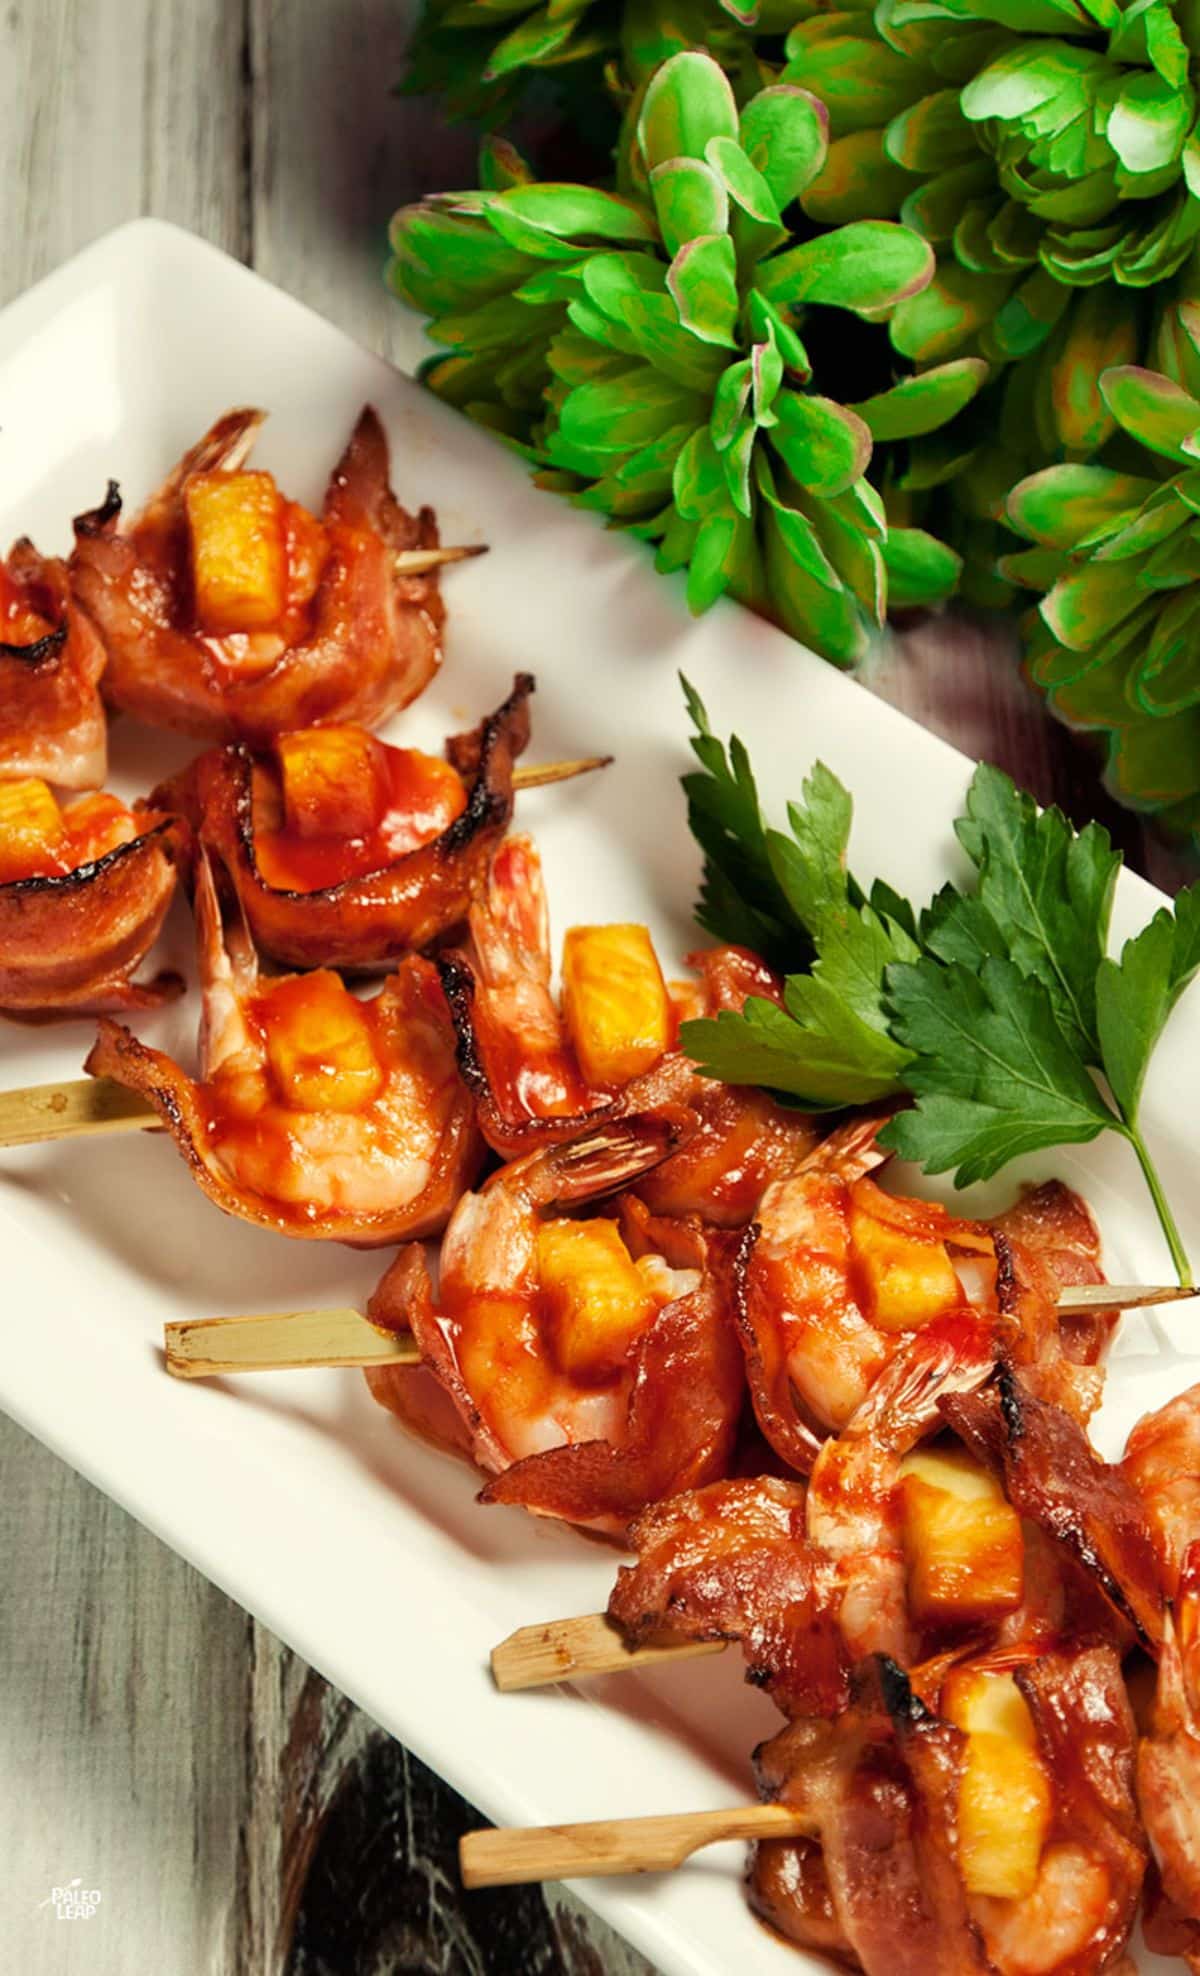 Shrimp Pineapple and Bacon Skewers